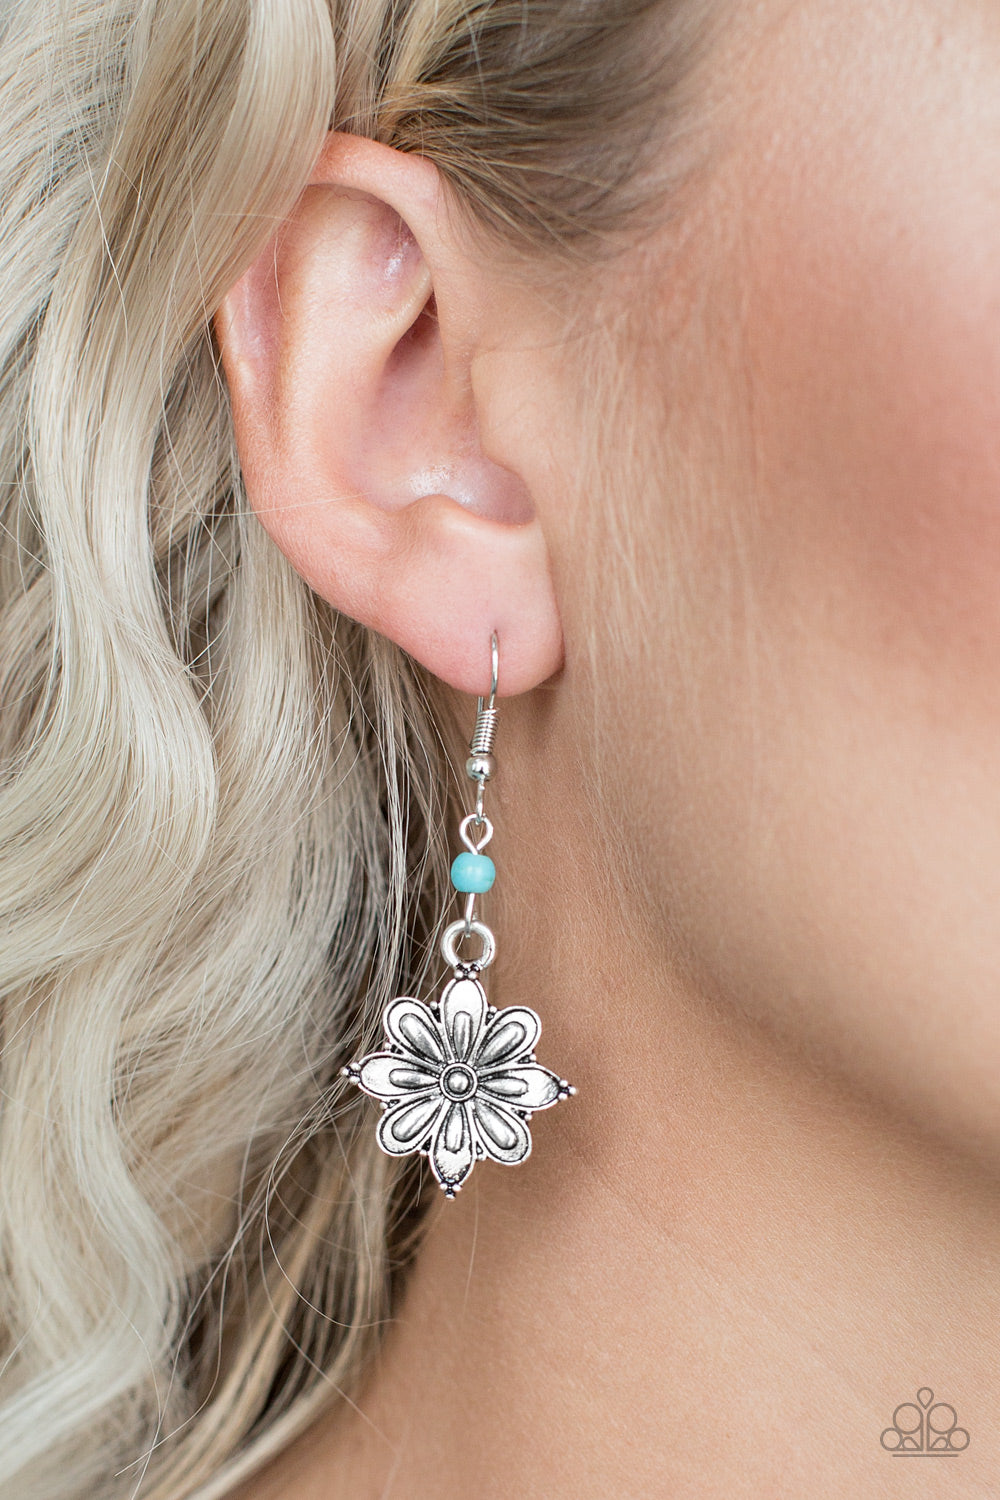 CACTUS BLOSSOM - BLUE TURQUOISE DAINTY SILVER FLOWER EARRINGS